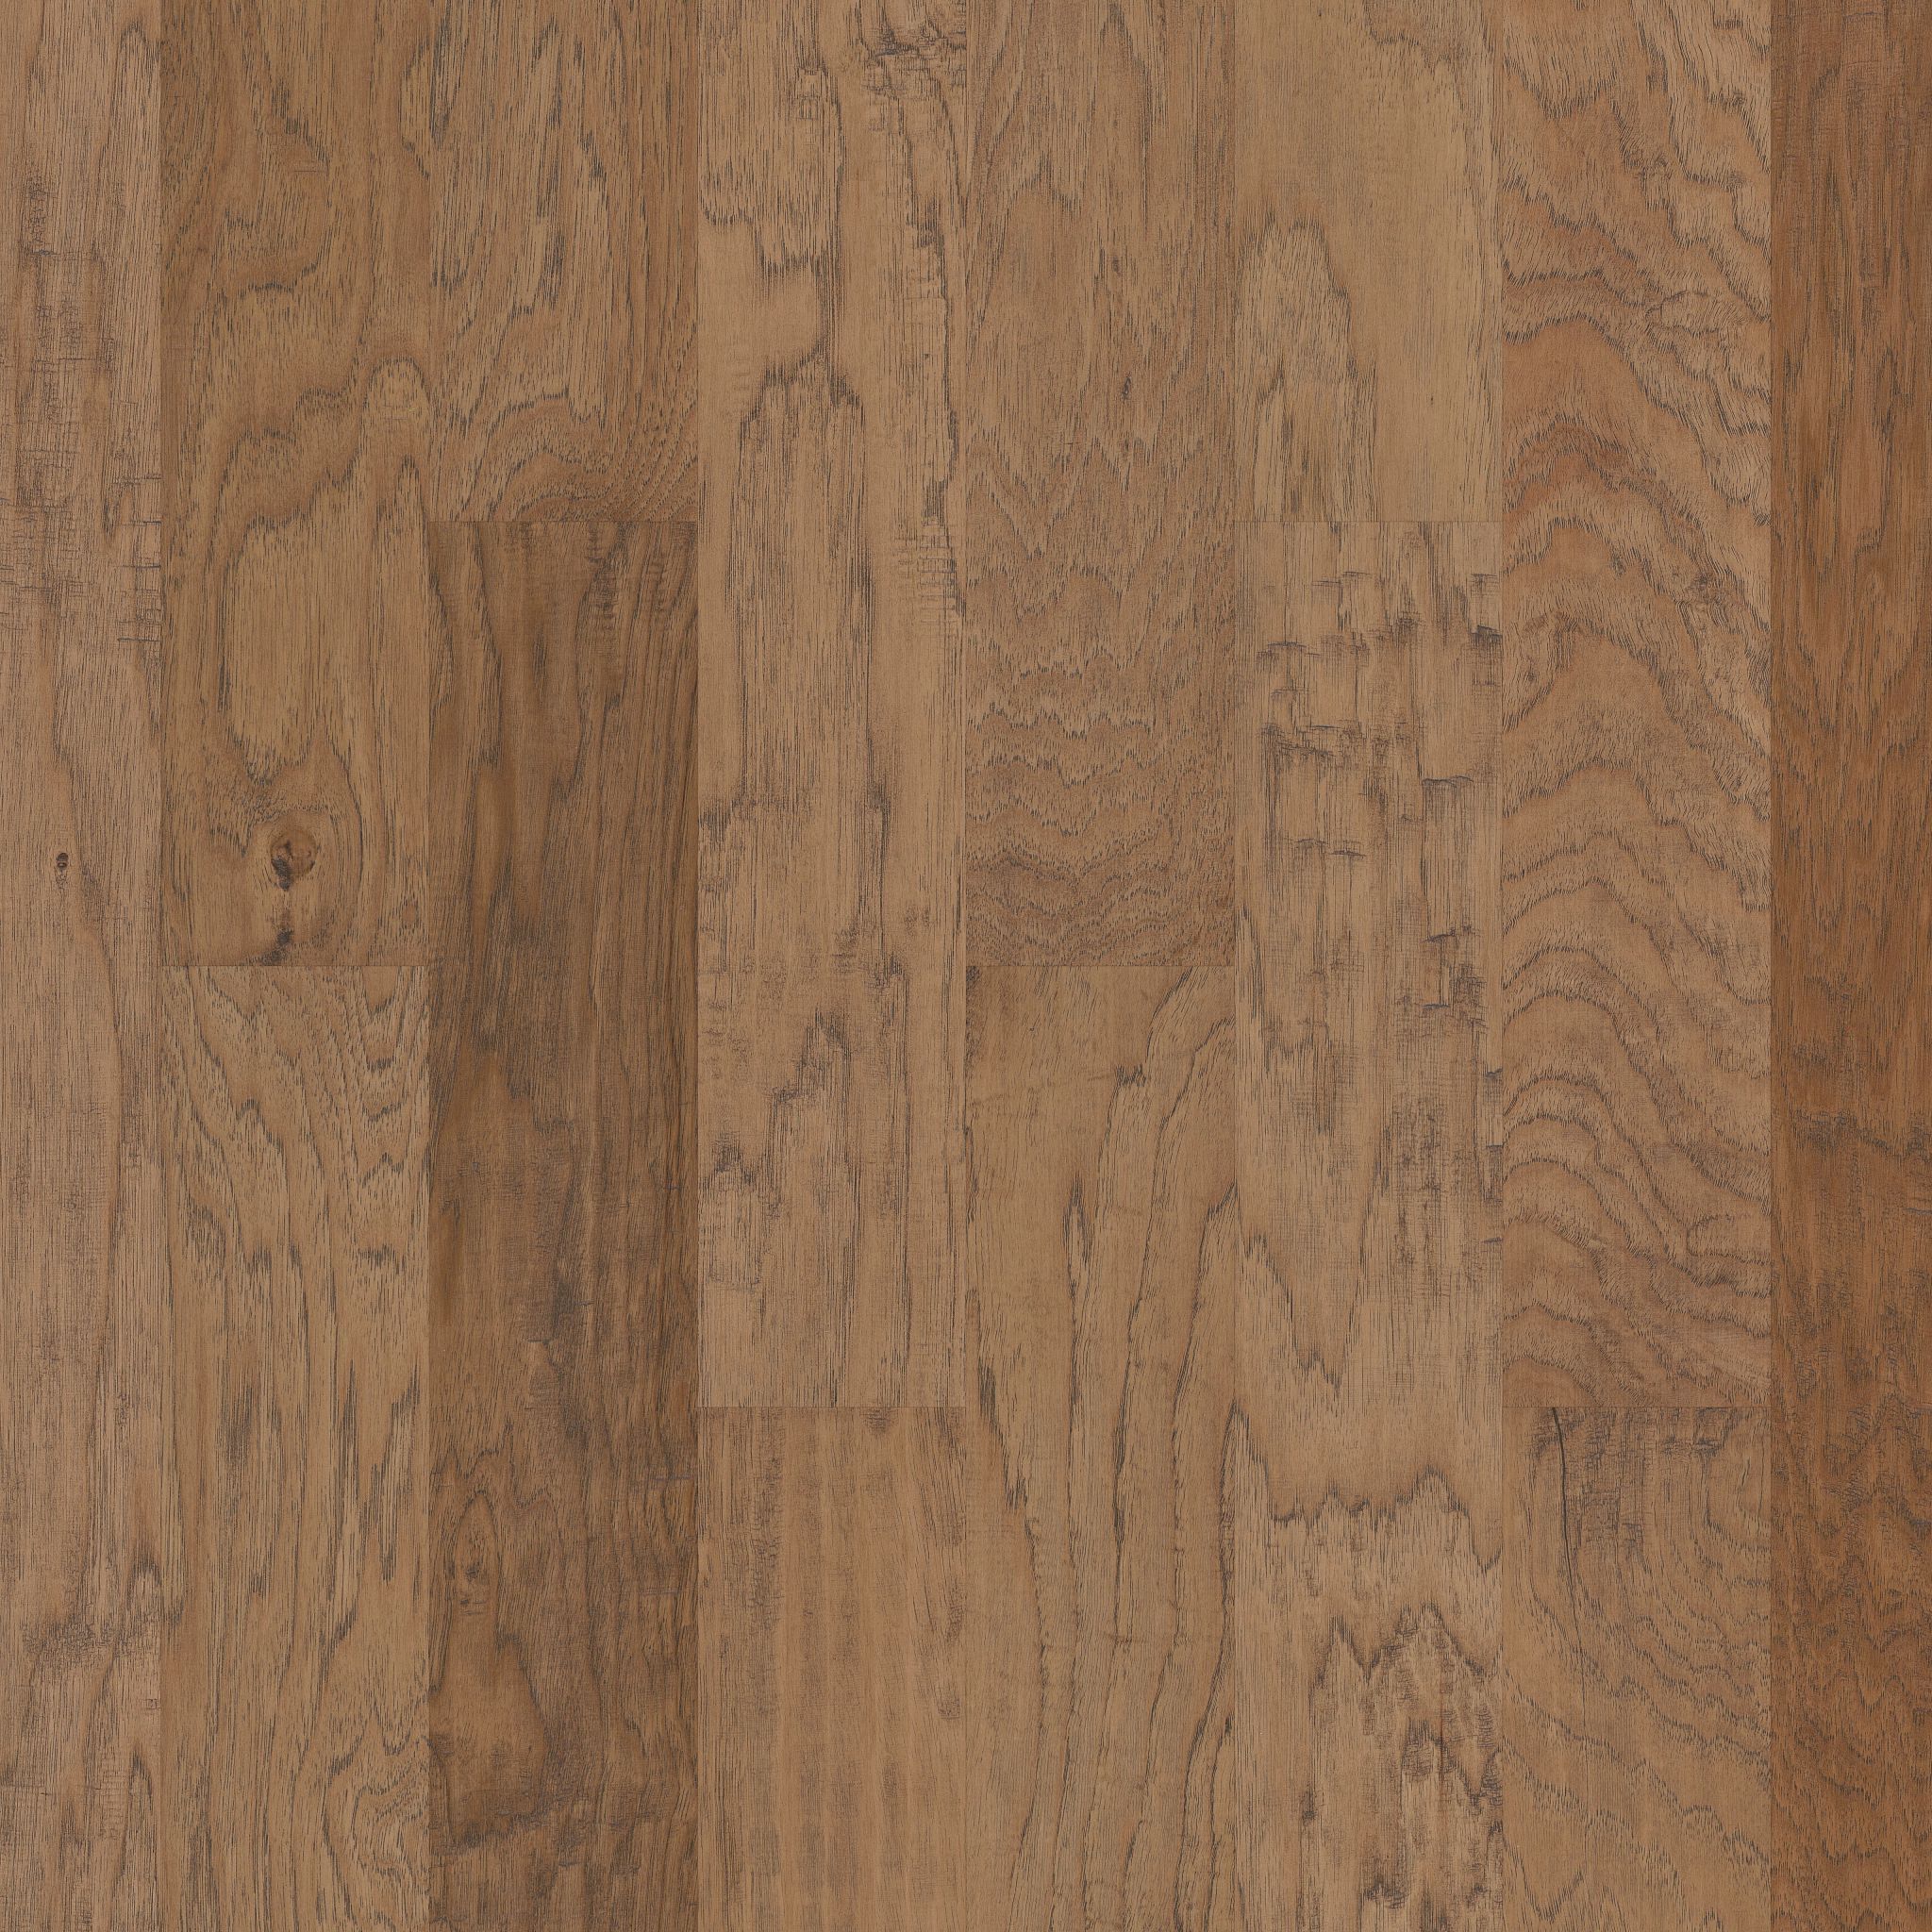 Style name and number: Sequoia Hickory 5″ SW539 and color name and number: Bravo 02002